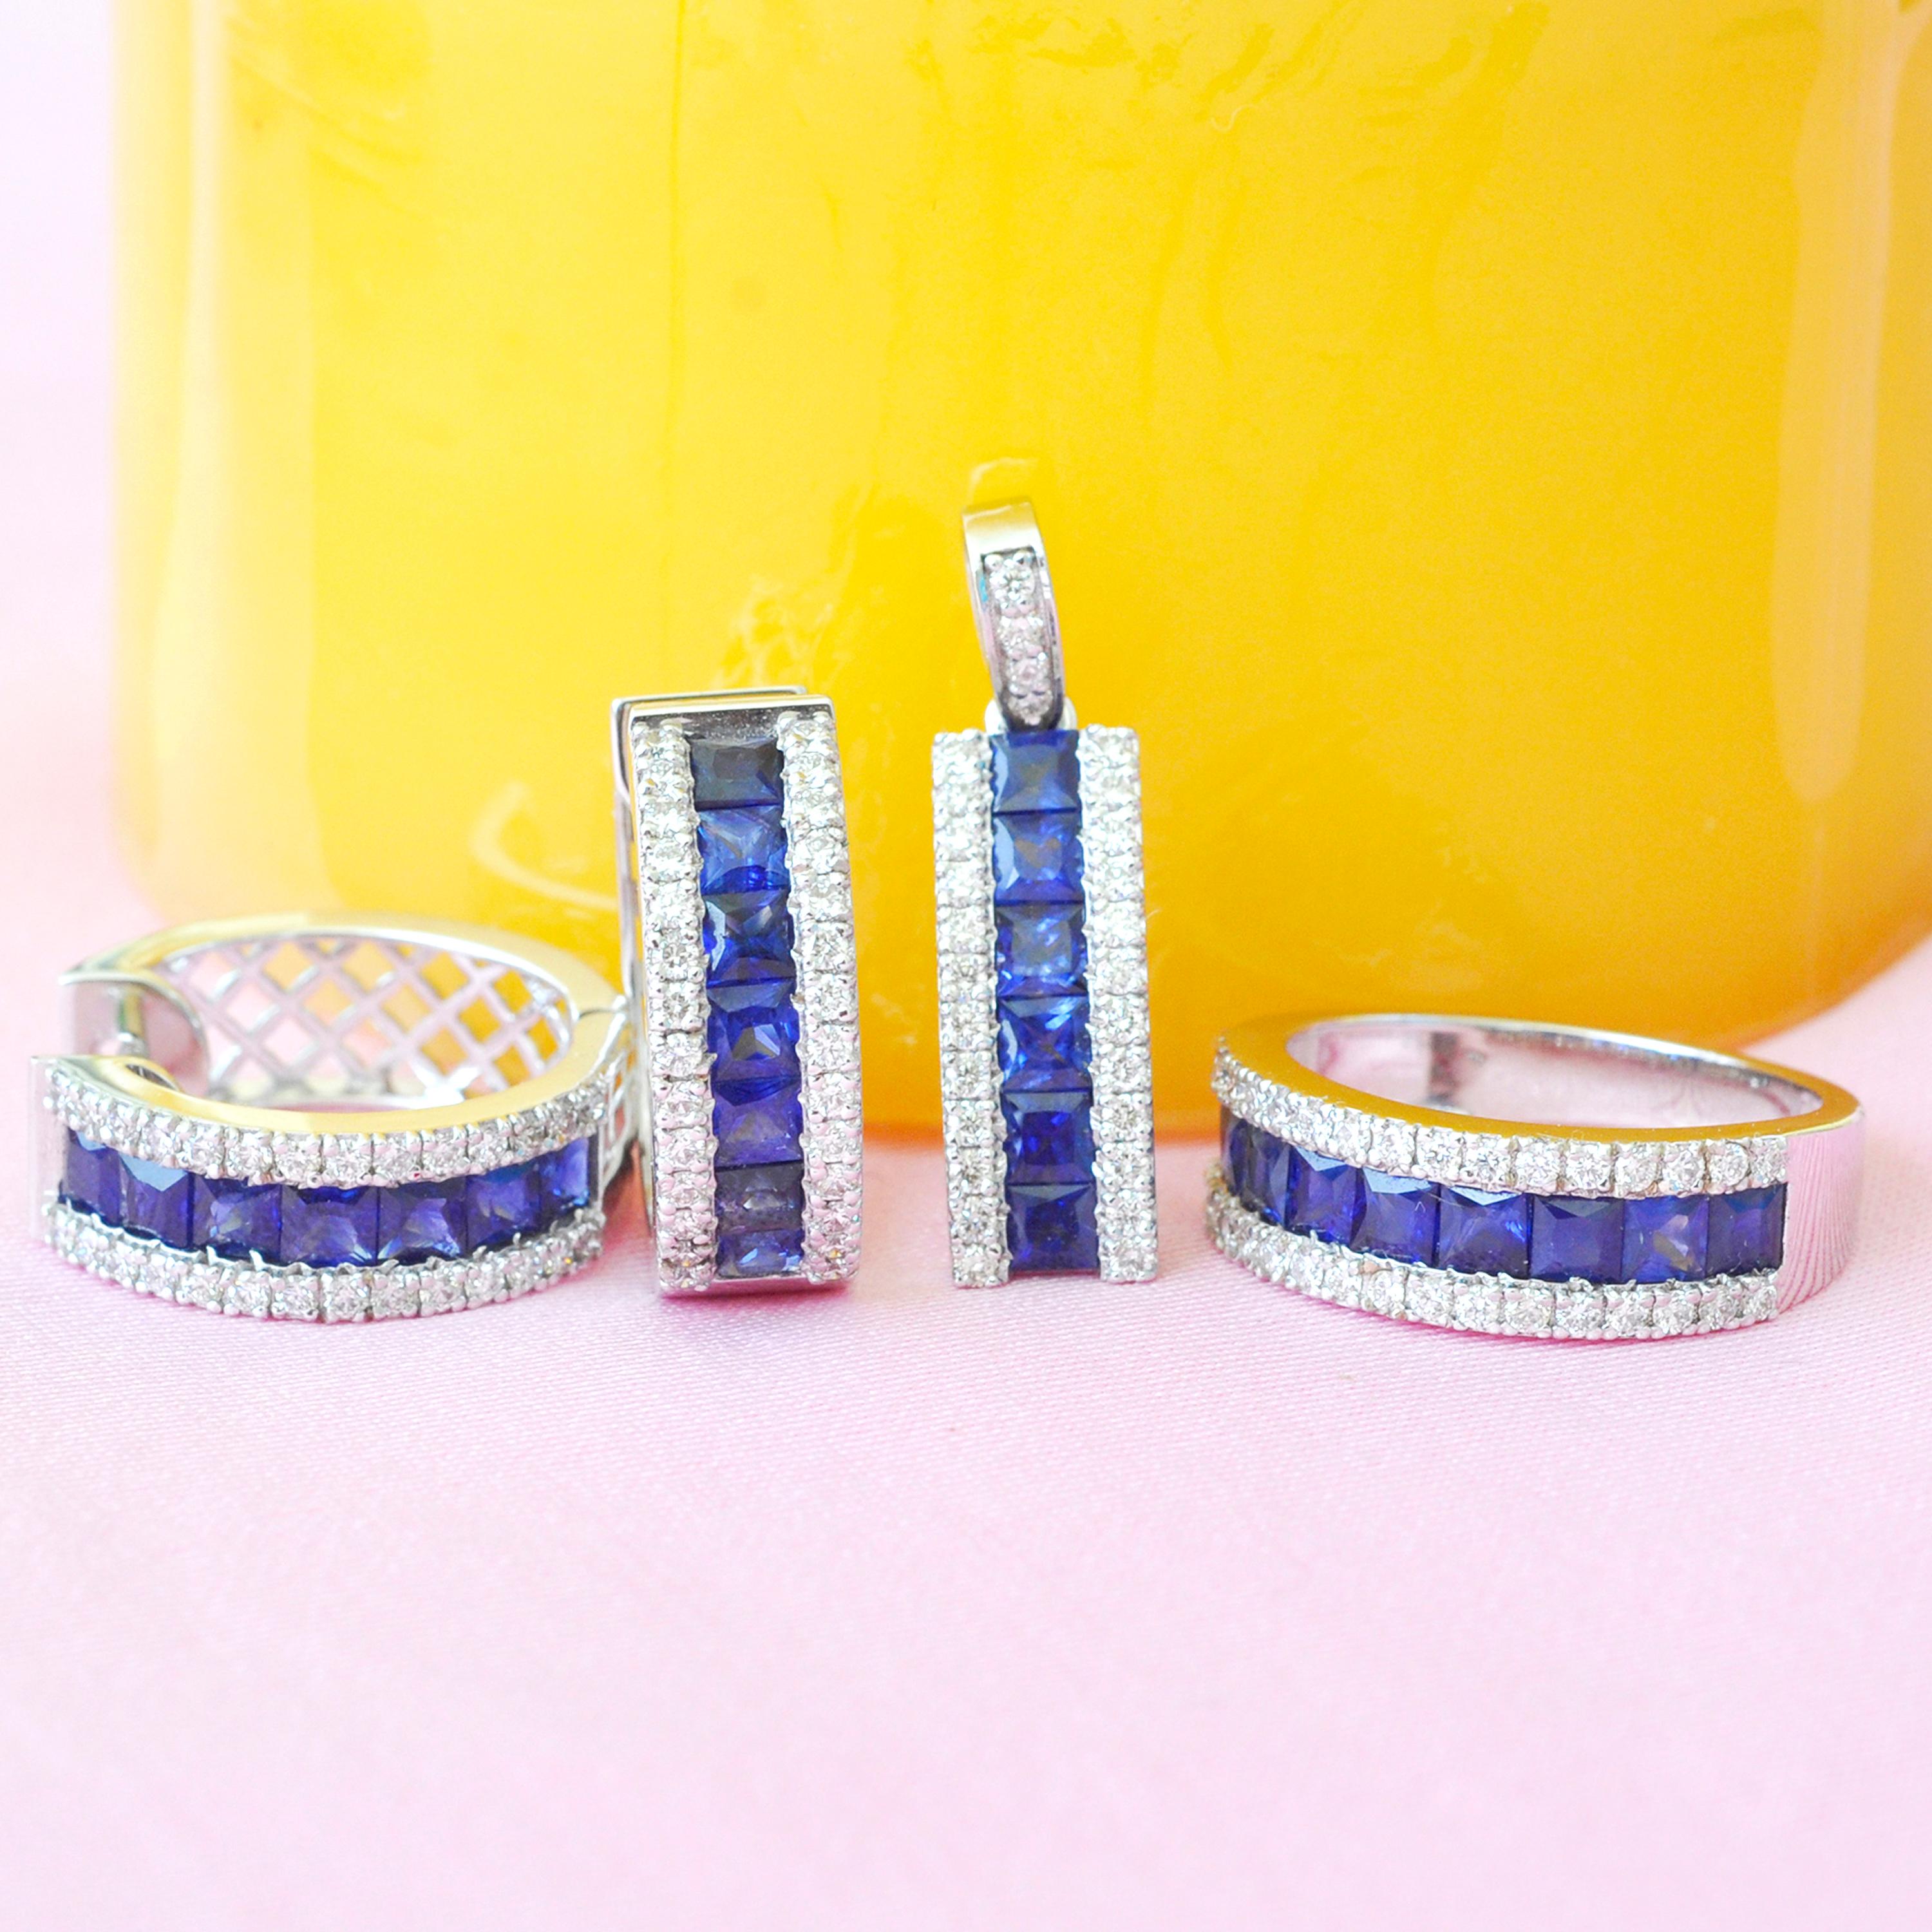 18 karat gold channel set princess cut blue sapphire diamond linear pendant hoop earrings ring set

The enchanting set with the vibrant blue sapphires incorporated within an equivalent layer of micro pave set diamonds on either side is distinctive